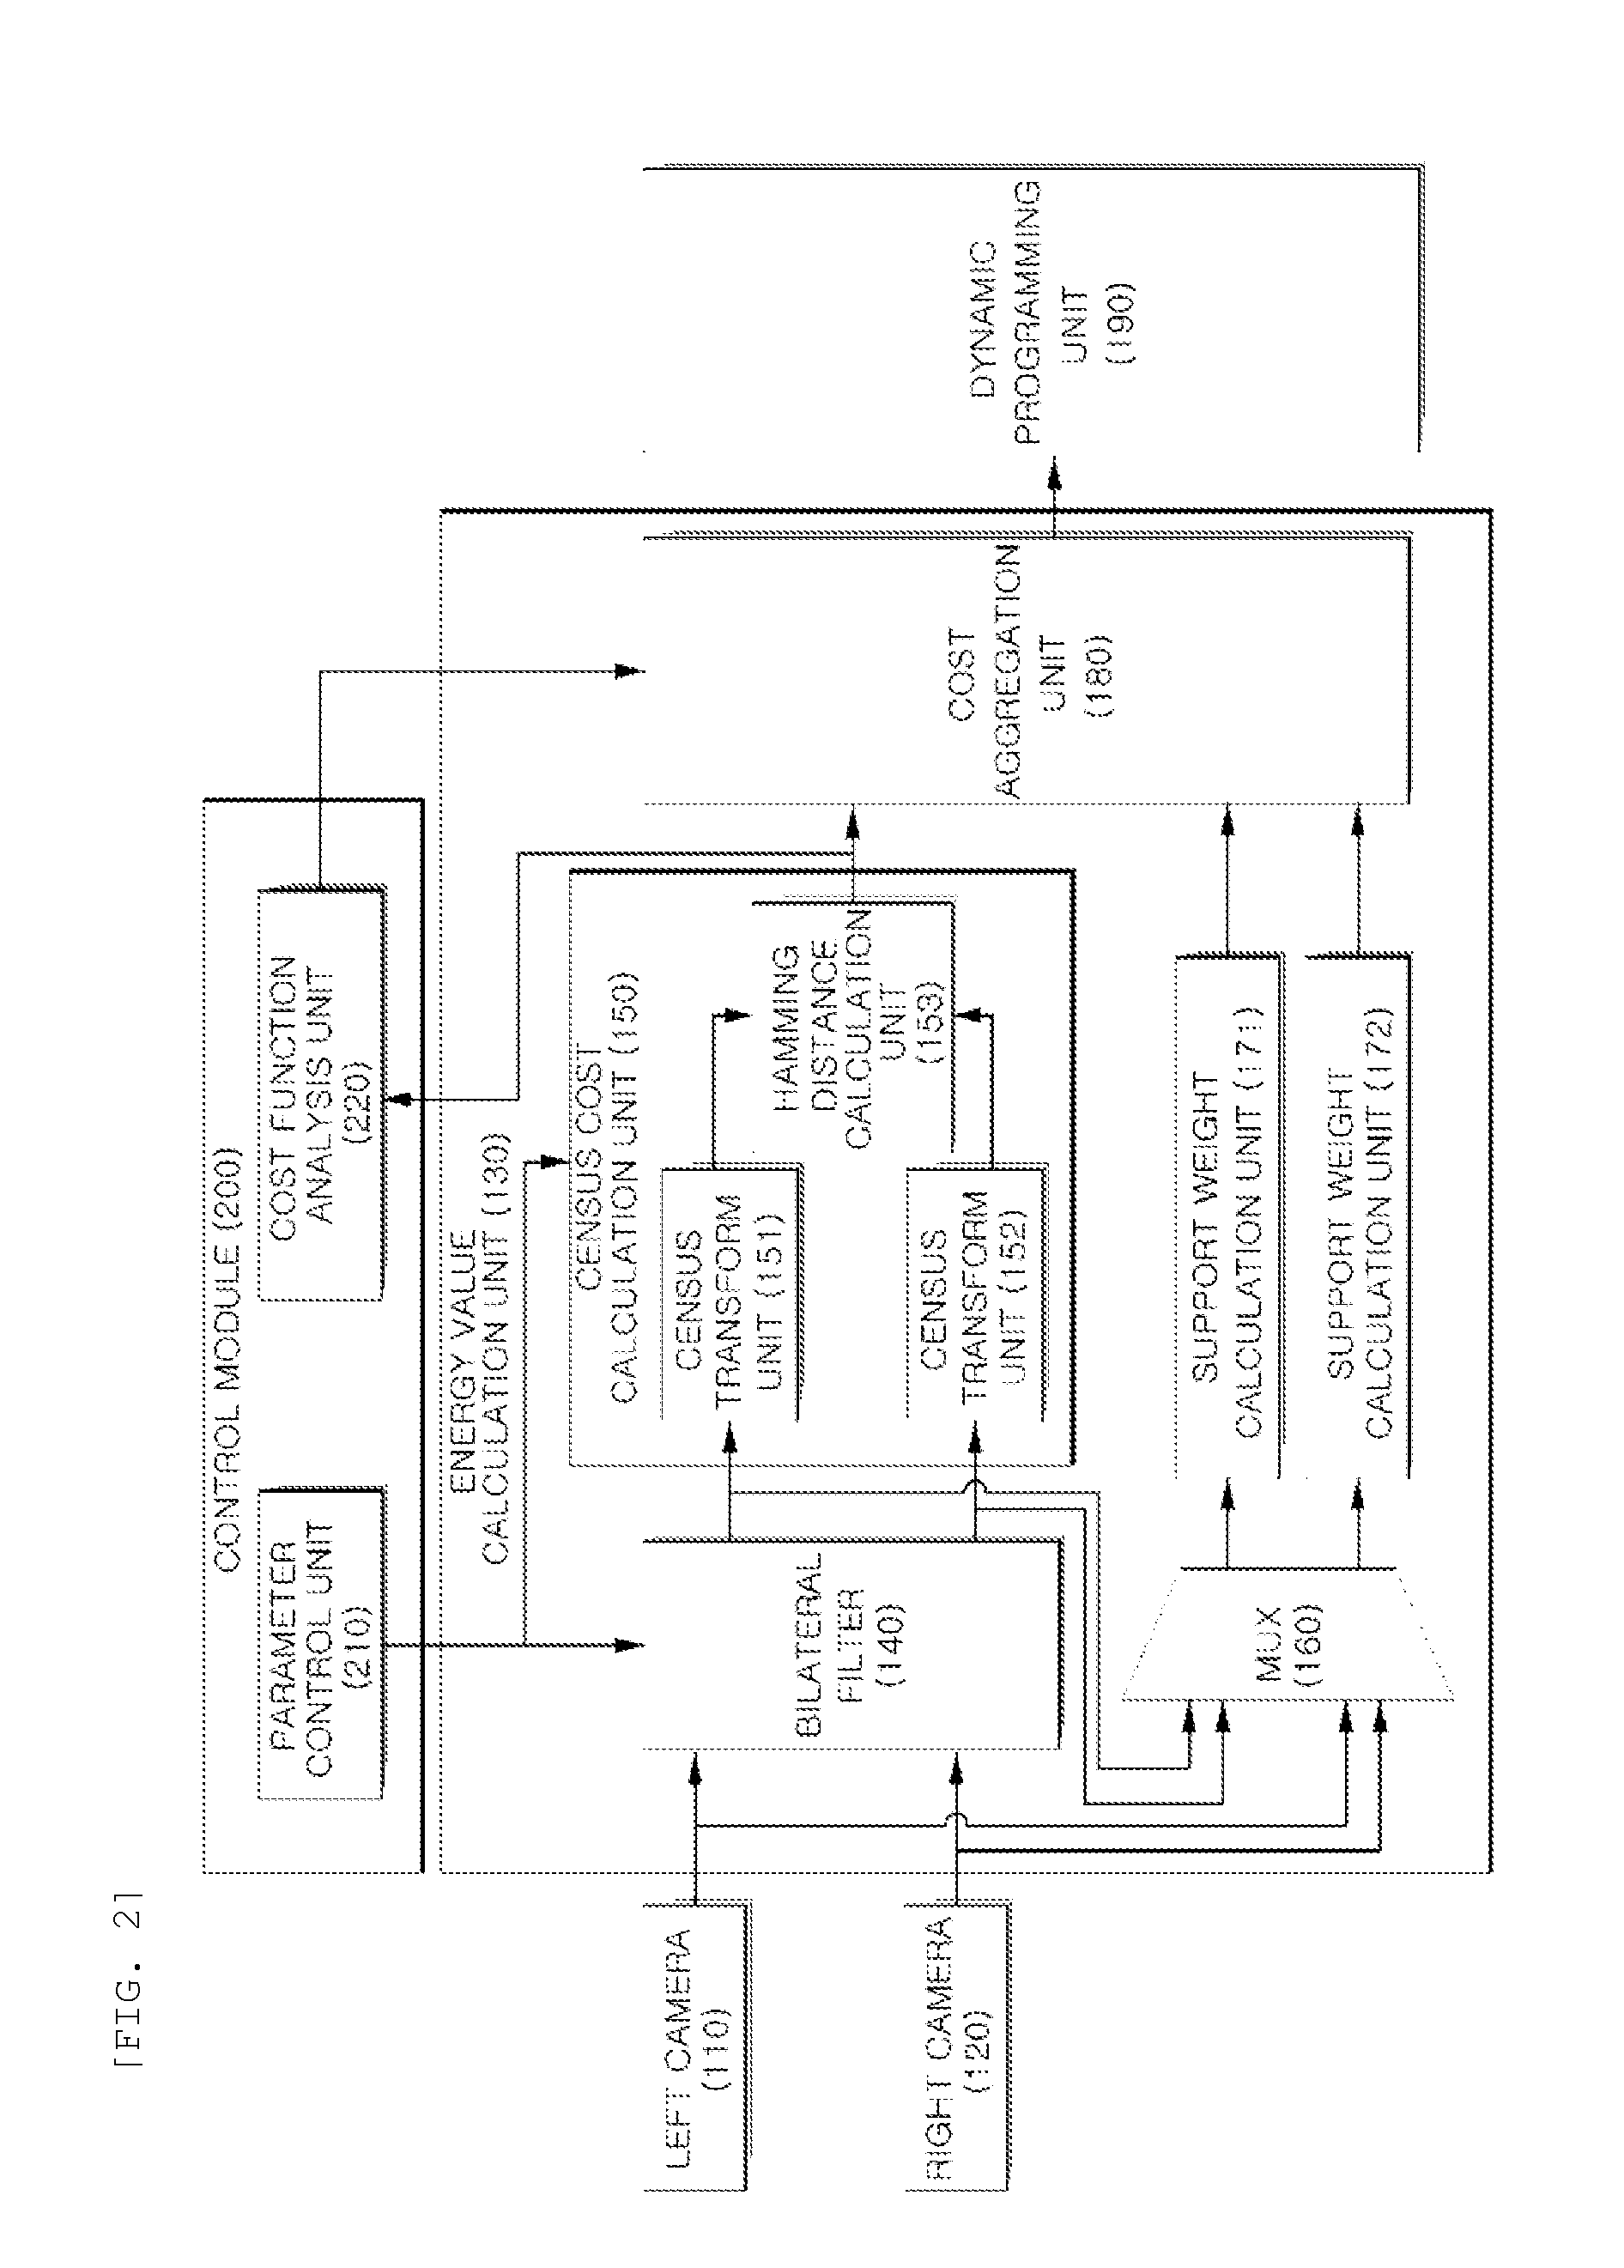 Apparatus and method for stereo matching